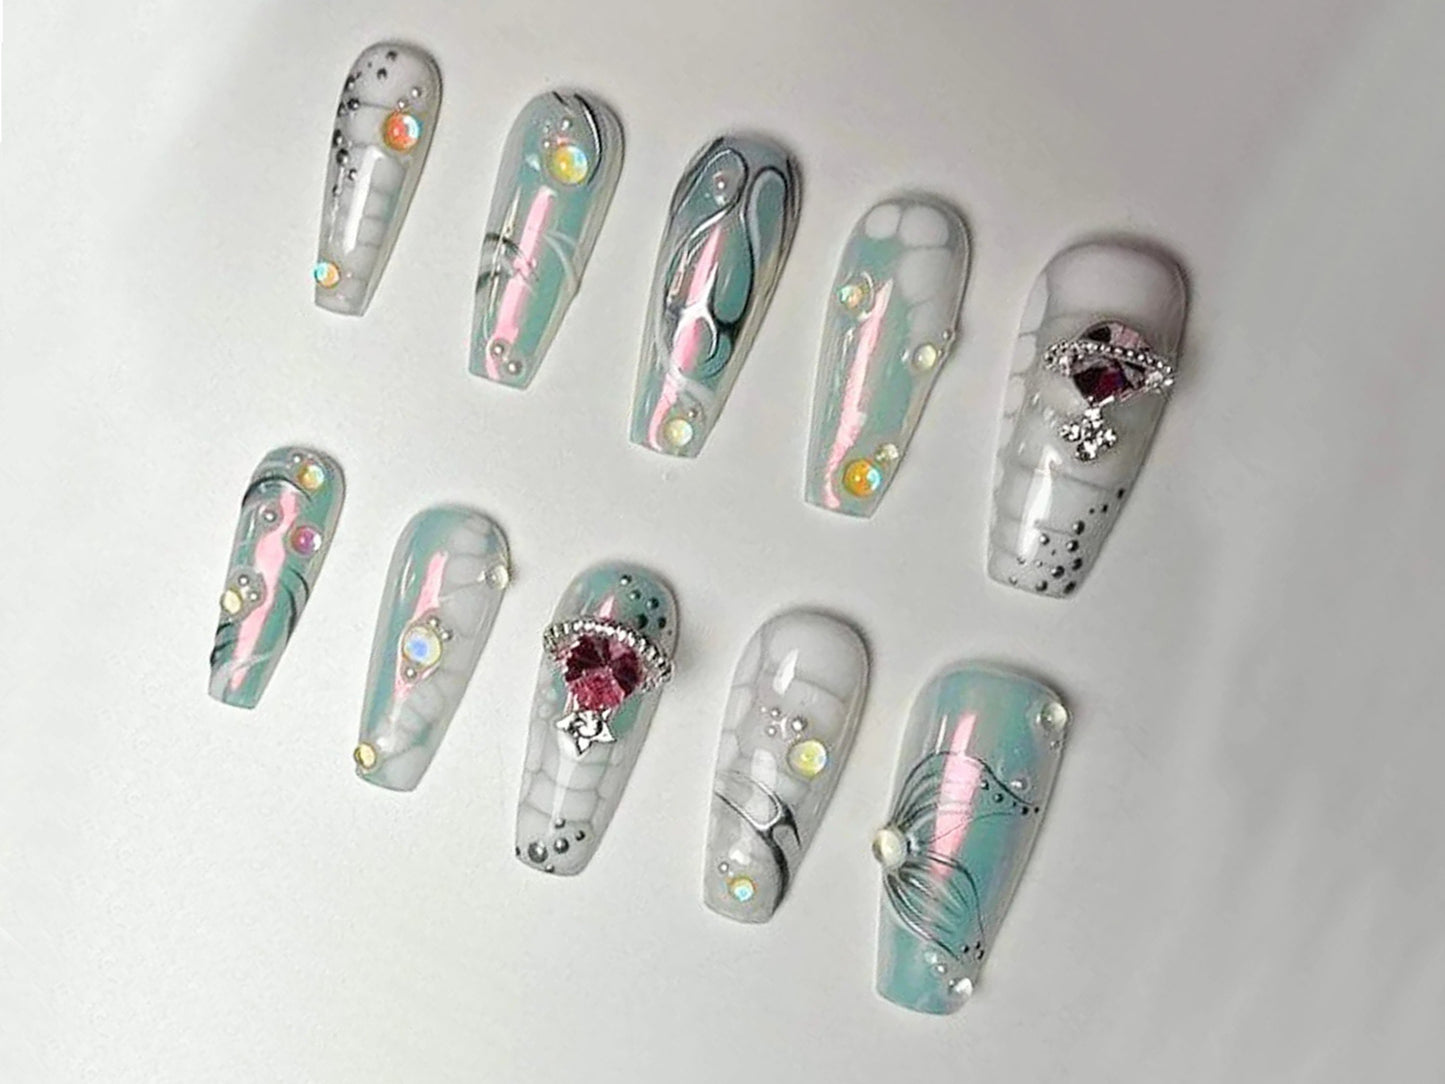 Metallic Mirror Sliver Press On Nails | 3D Silver Gel in Fake Nails | 3D Water Drop Gel | Ombre Nail Art | Nails With Global Charms | J44